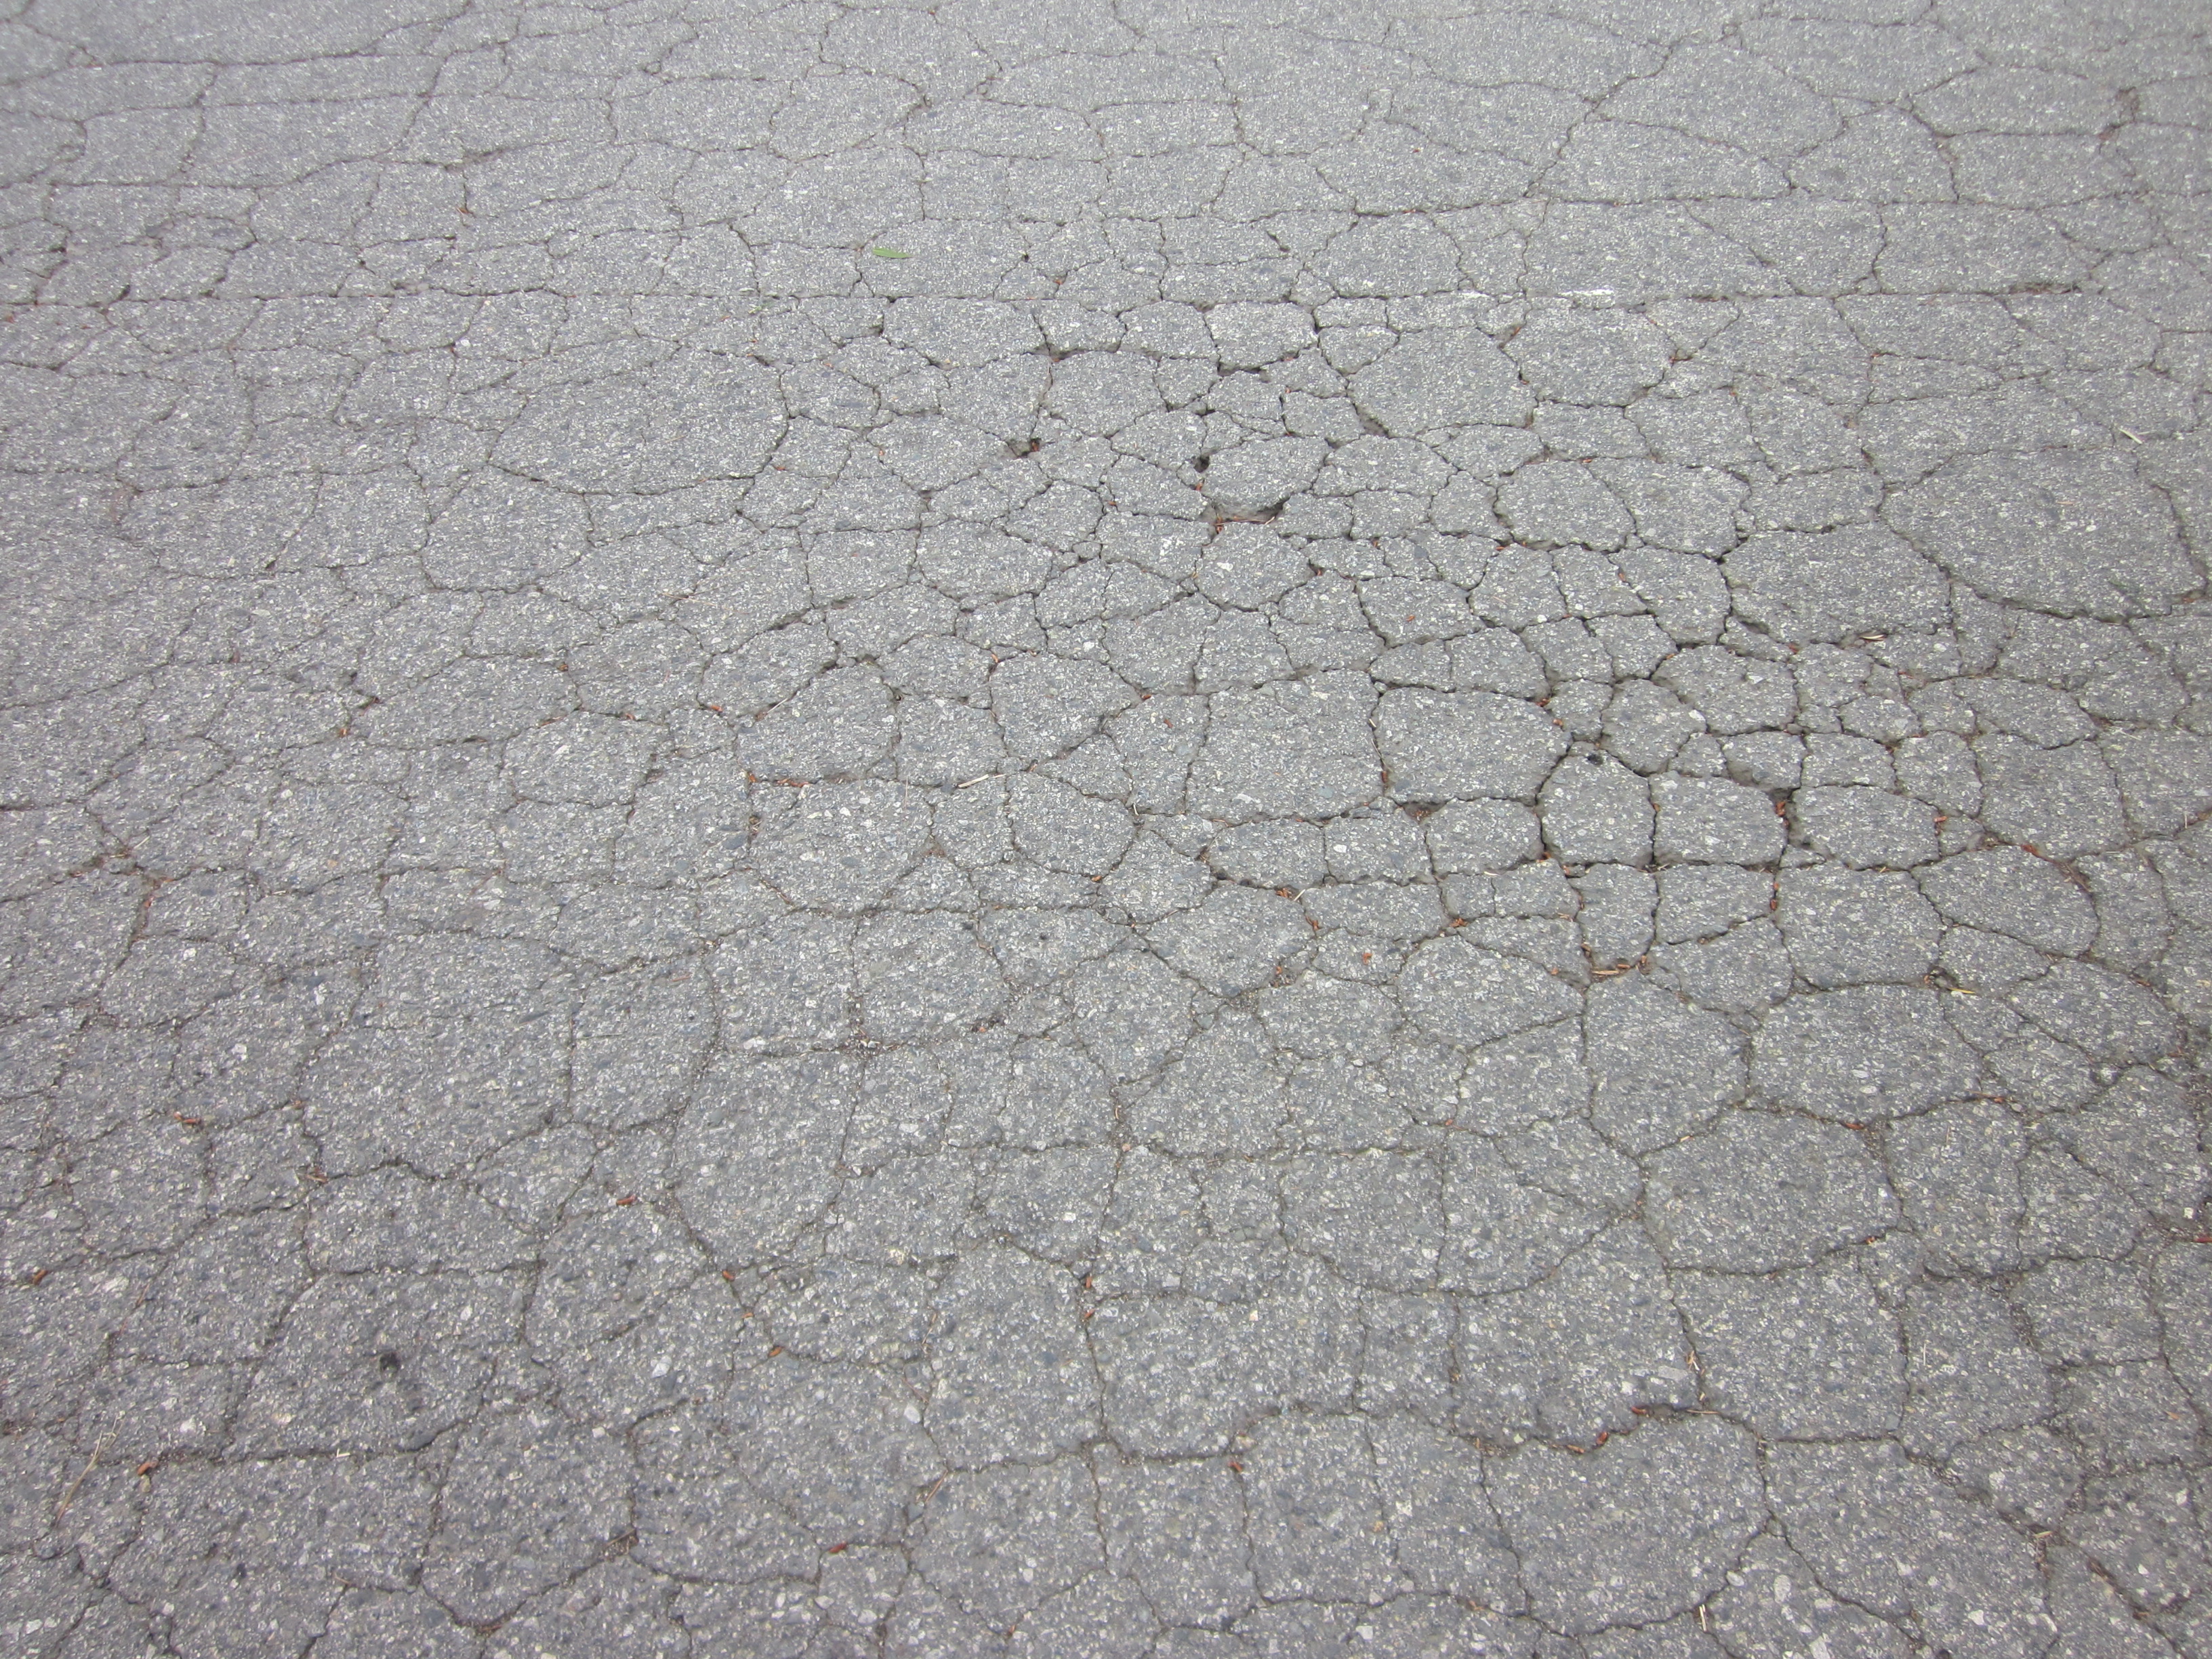 Projected pavement distresses are used as performance indicators.